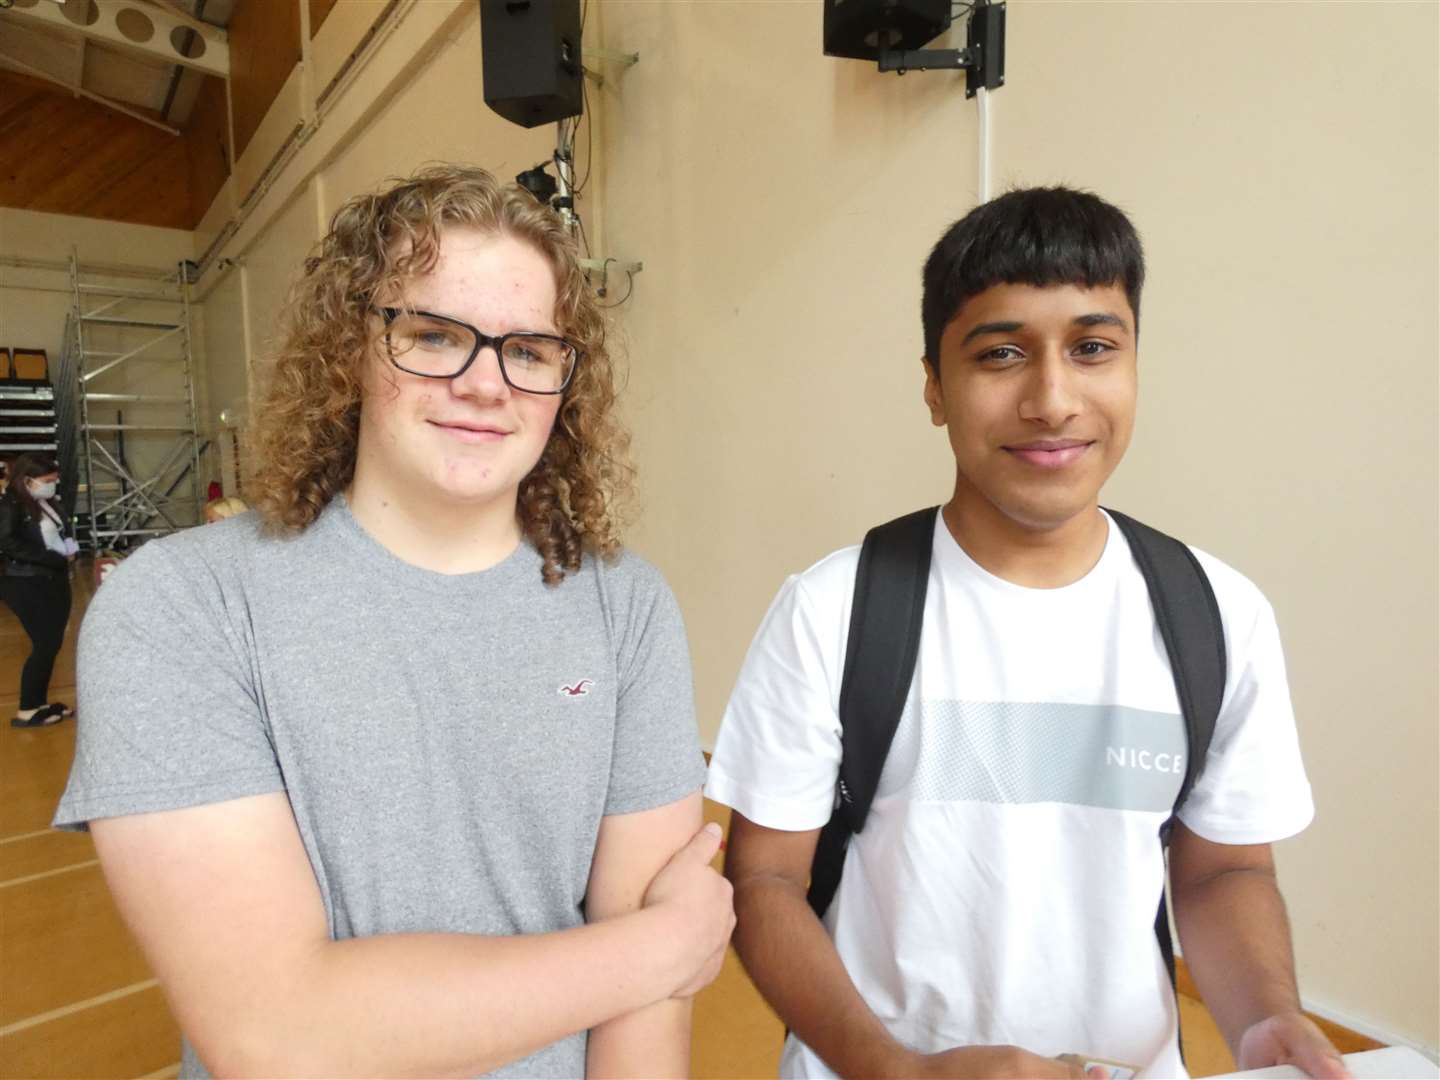 Kyle Fagg, left, and Rohan Verma said they'd found the past year 'less stressful' when they picked up their GCSE results at Fulston Manor School, Sittingbourne